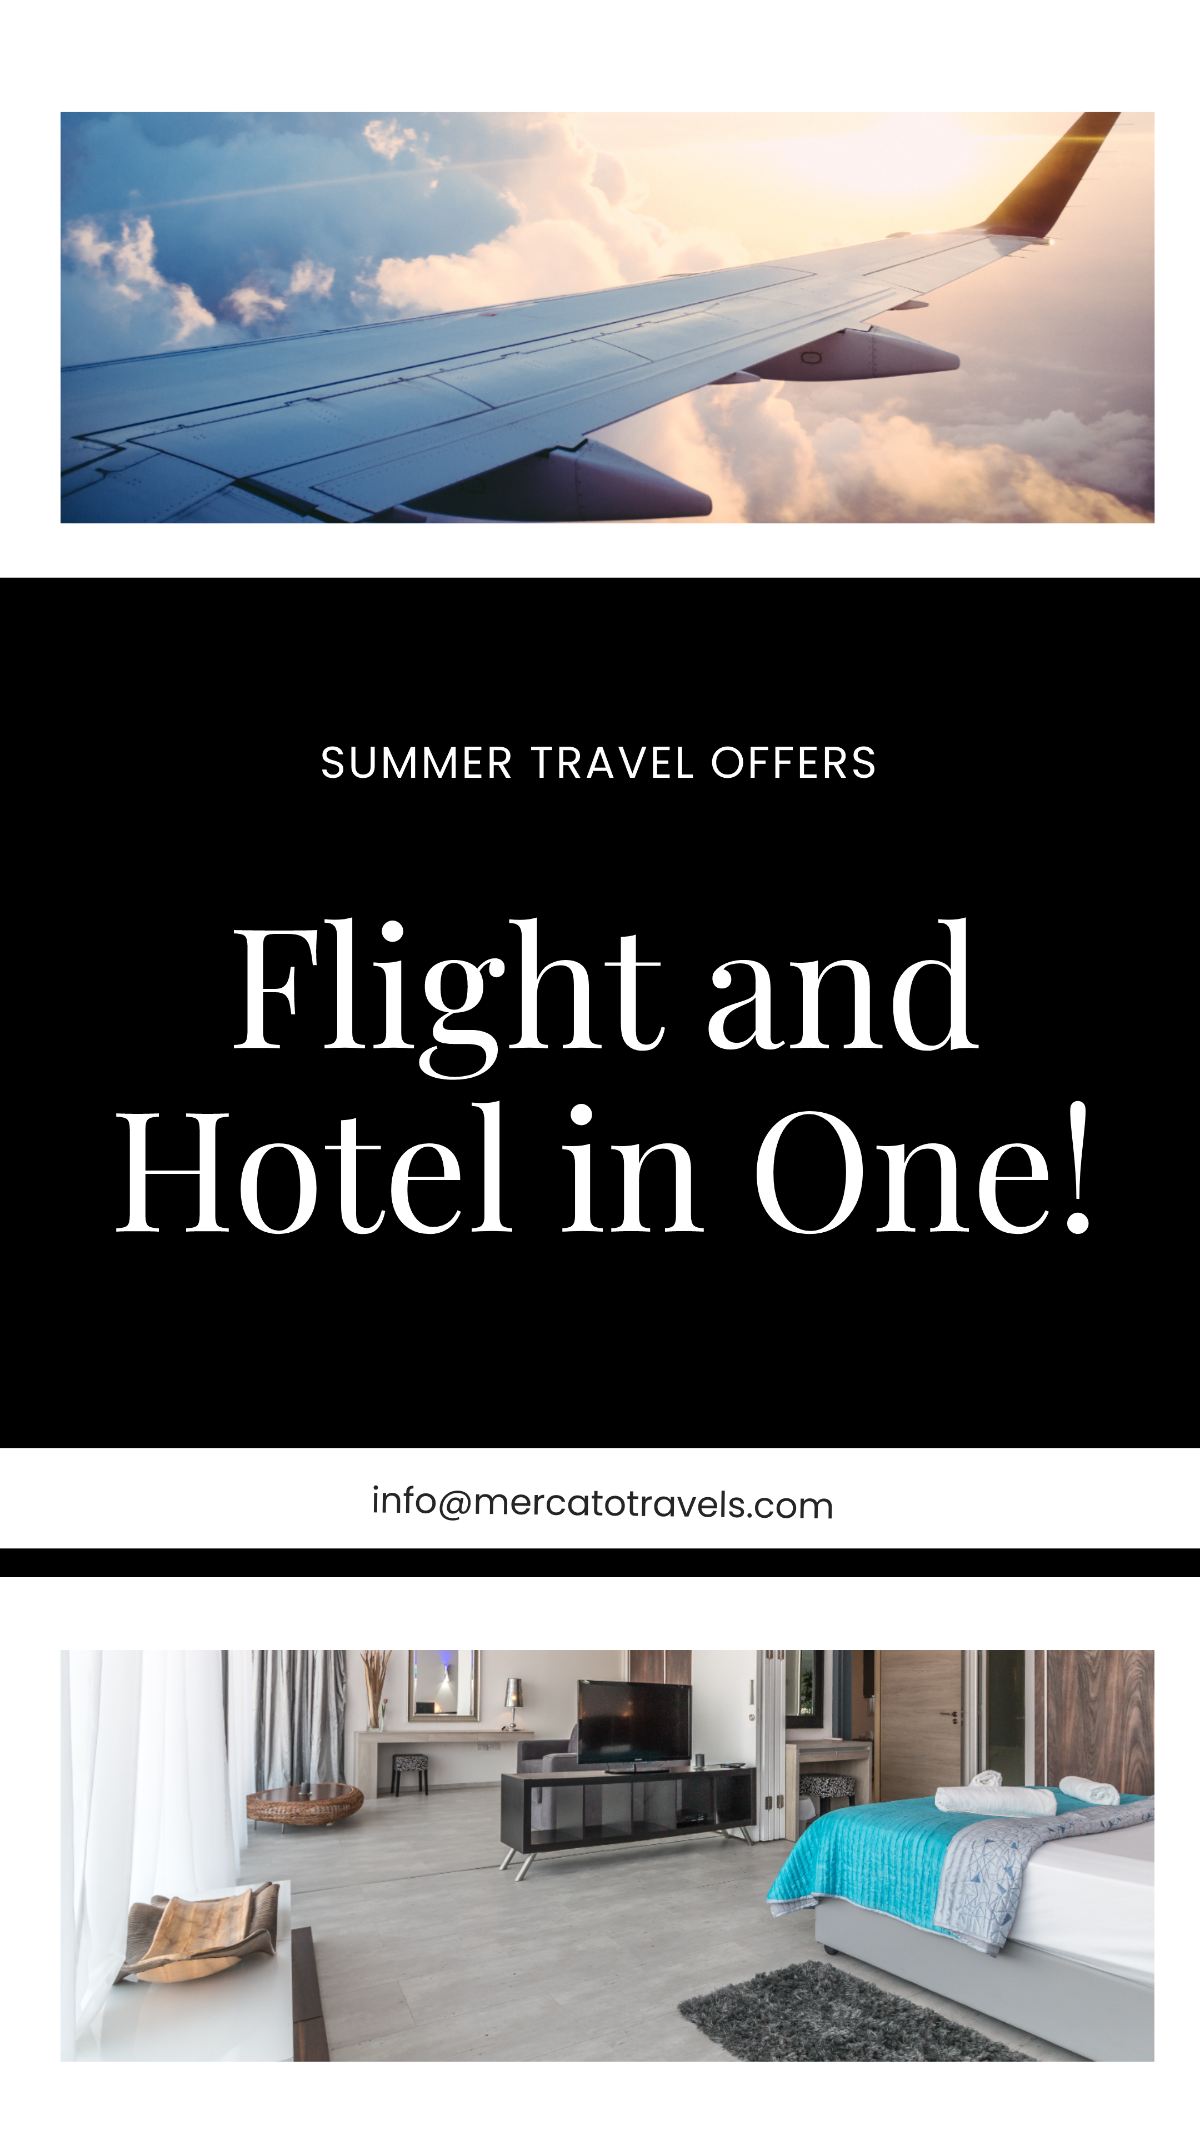 Travel Offer Whatsapp Image Post Template